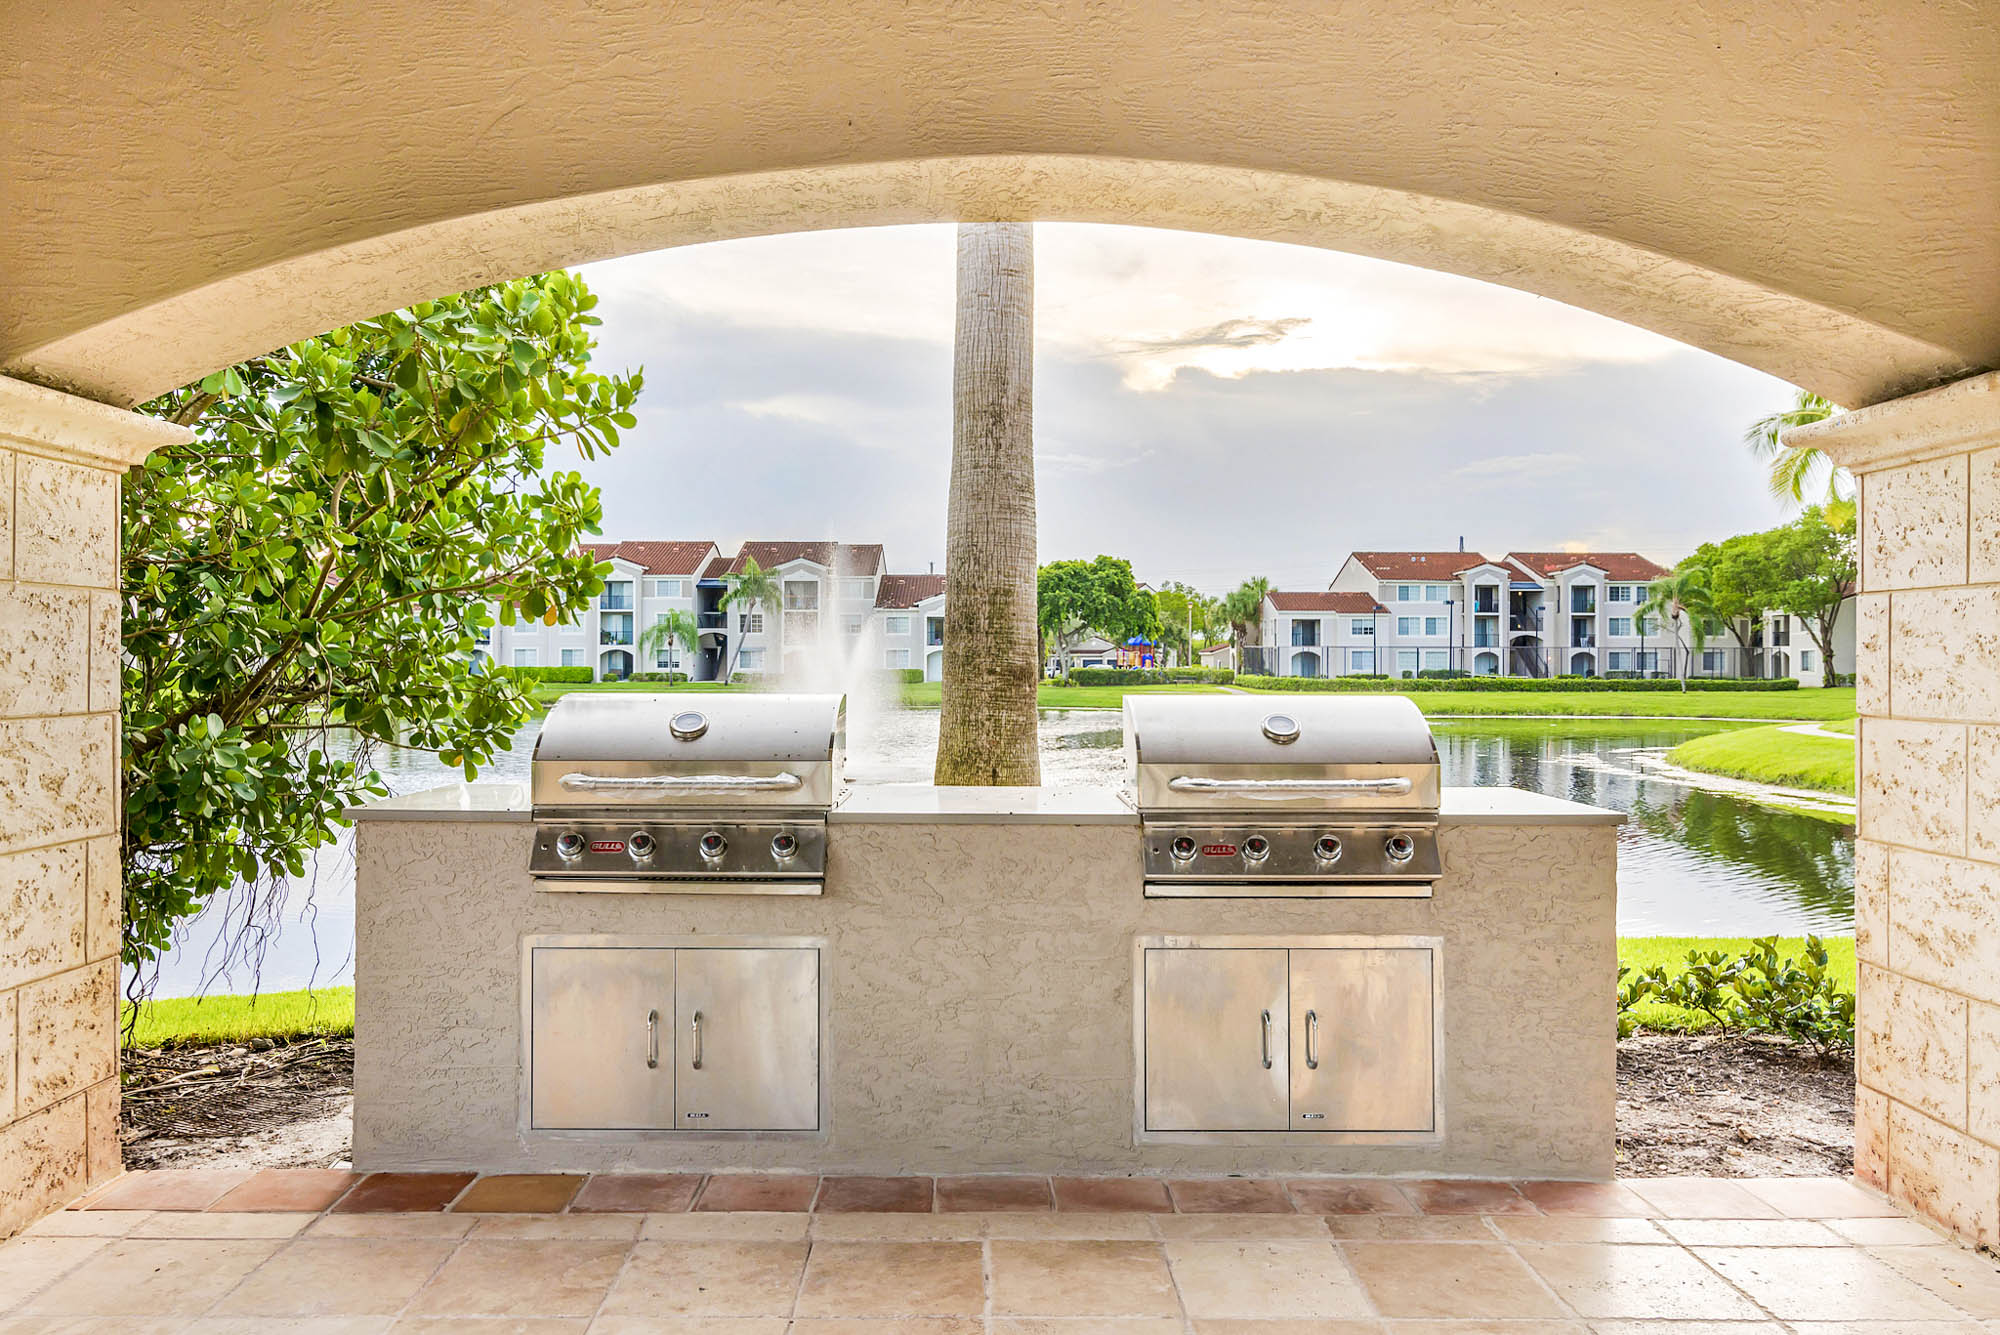 The grilling area at Miramar Lake in Fort Lauderdale, FL.